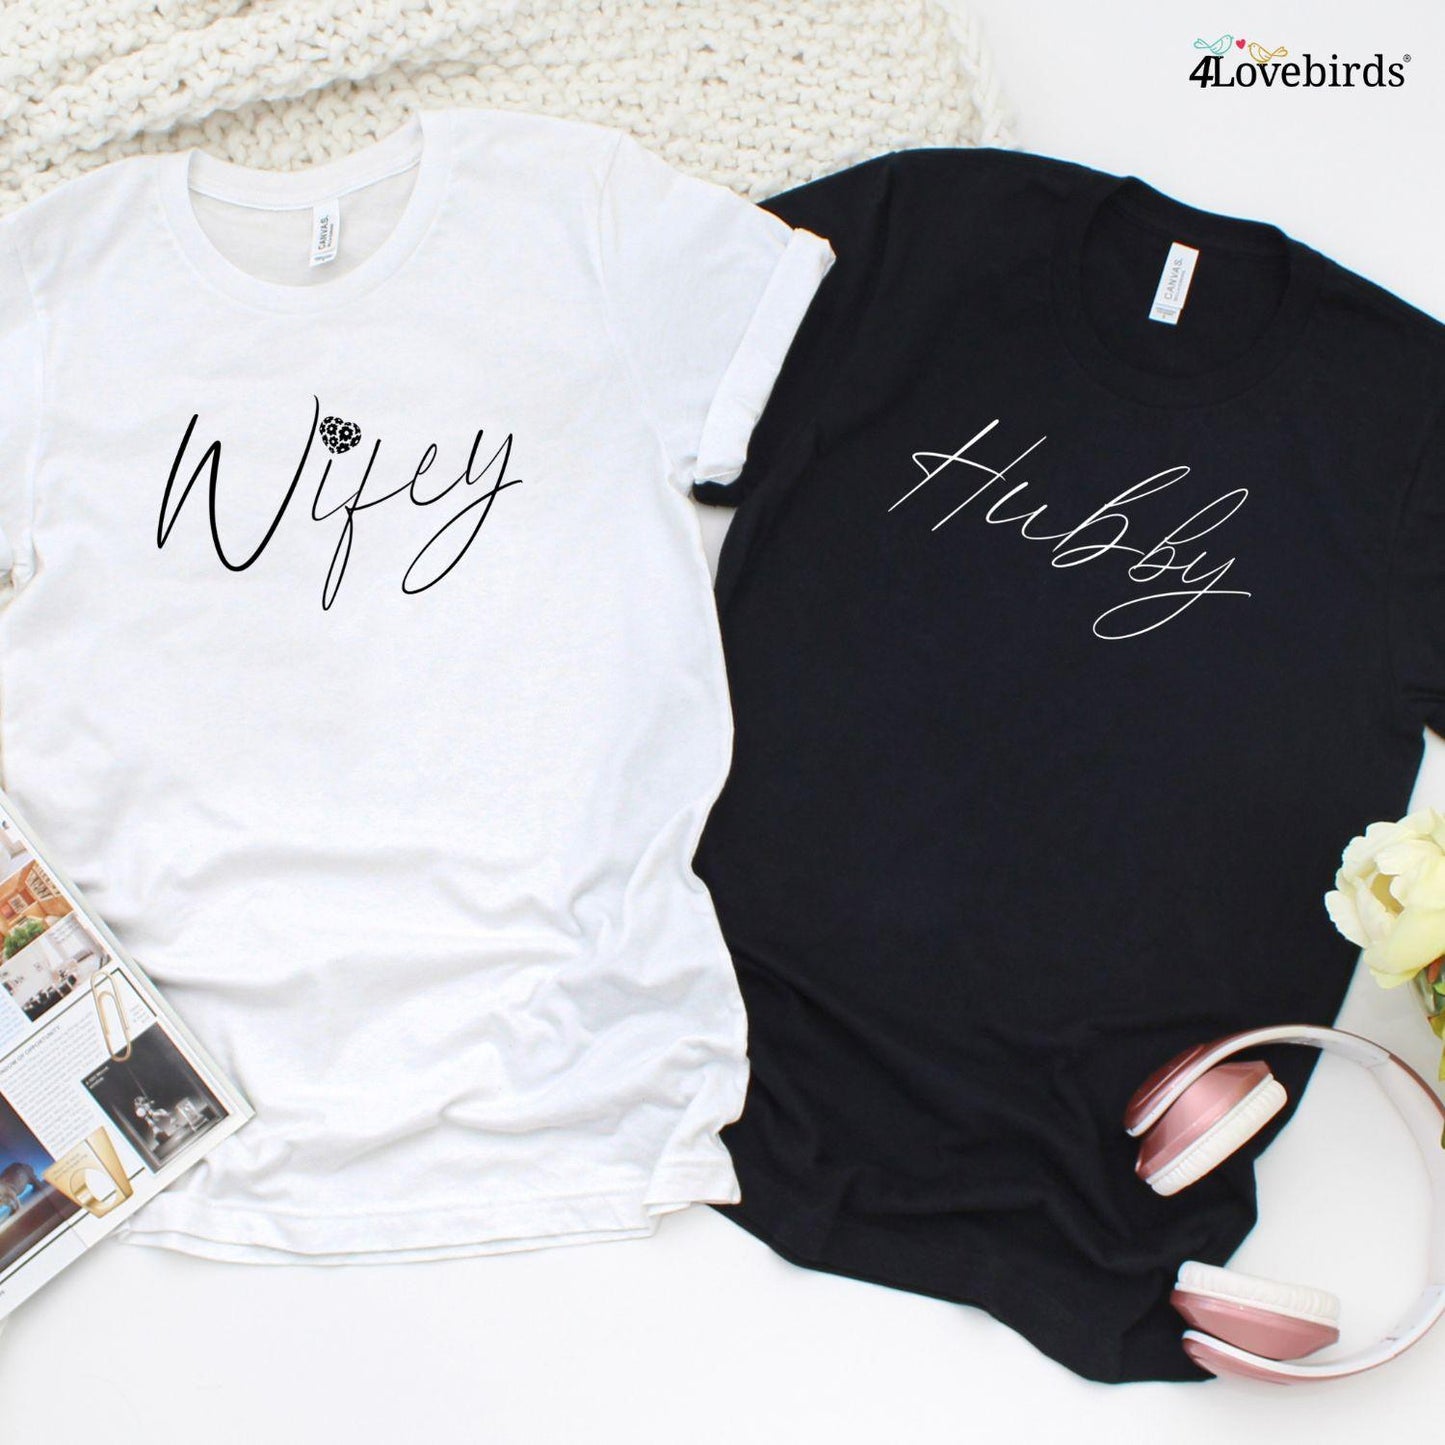 Matching Gifts for Couples: Wifey & Hubby Outfits, Bride & Groom Gifts, Honeymoon Set - 4Lovebirds